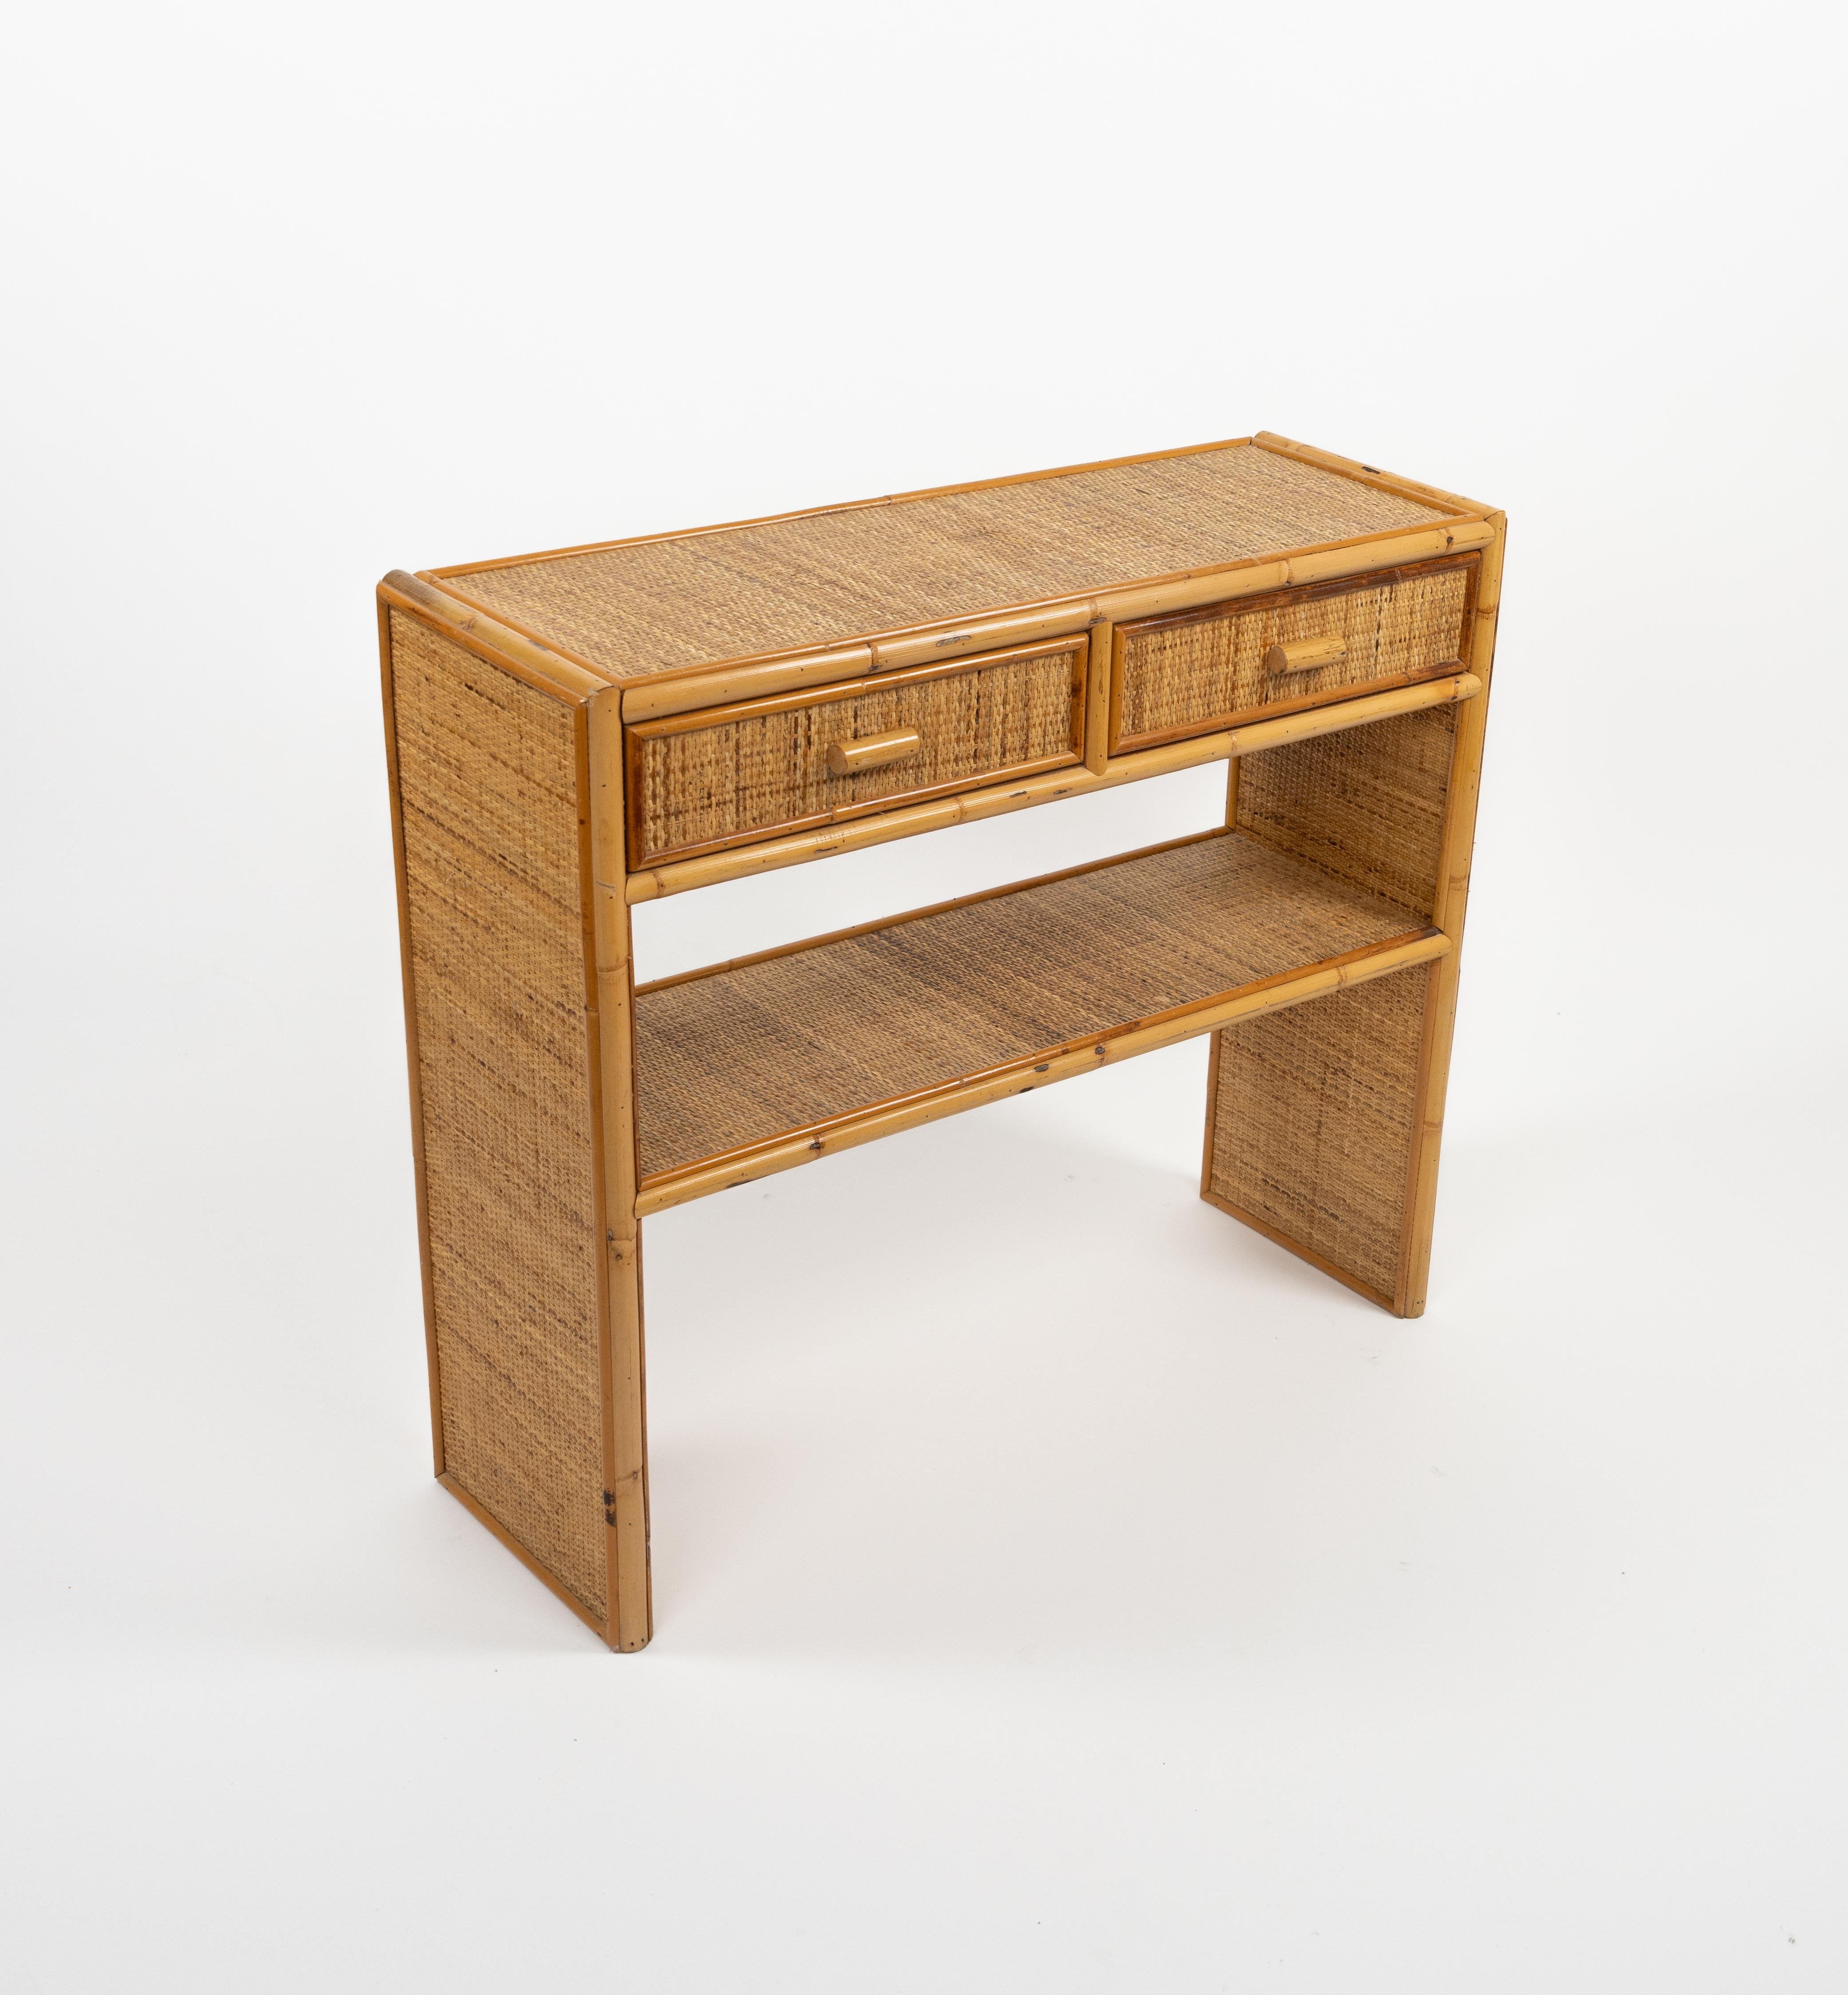 Late 20th Century Midcentury Bamboo and Rattan Console Table with Drawers, Italy 1970s For Sale